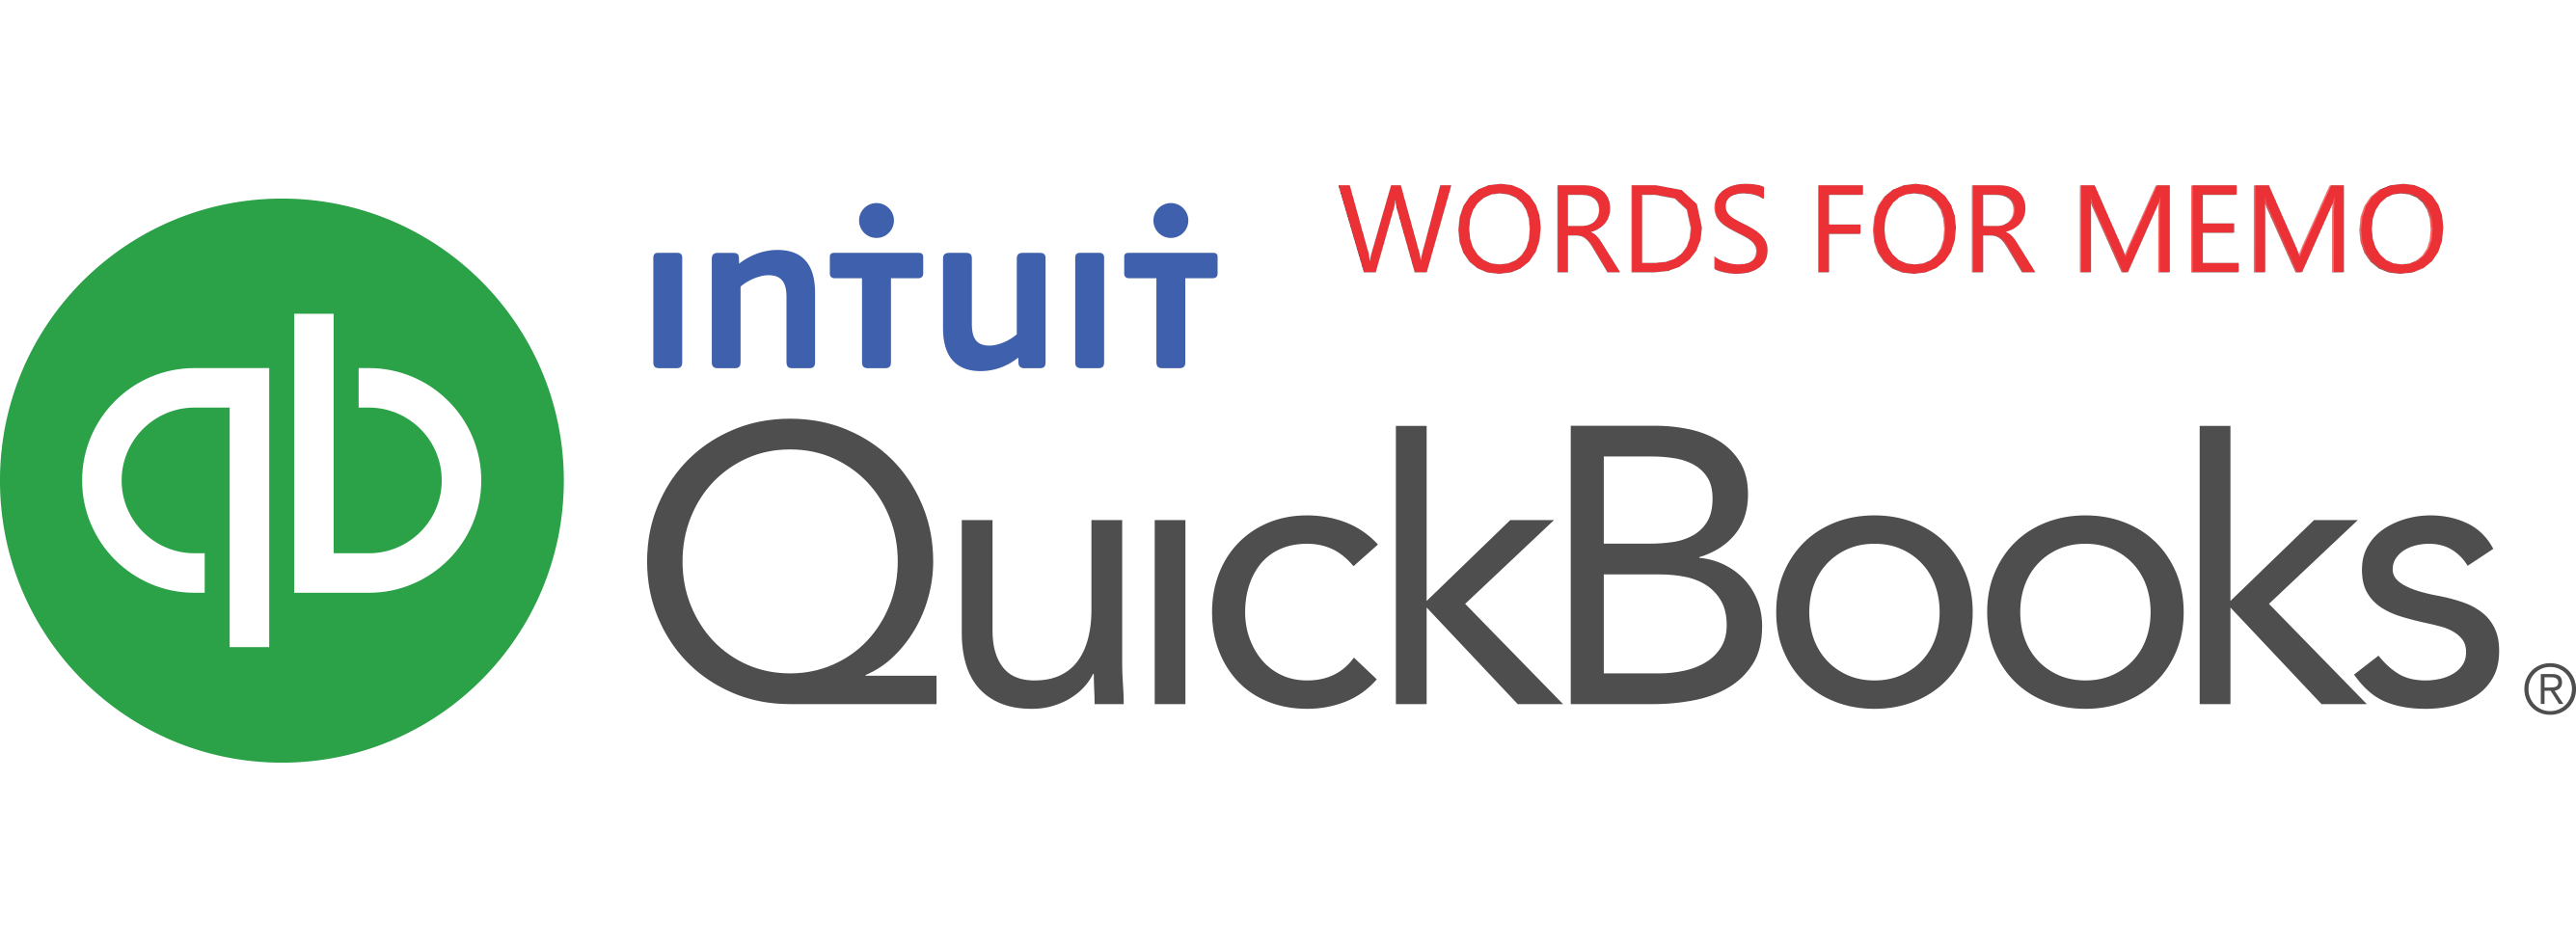 QuickBooks Words for Memo - Cover Image